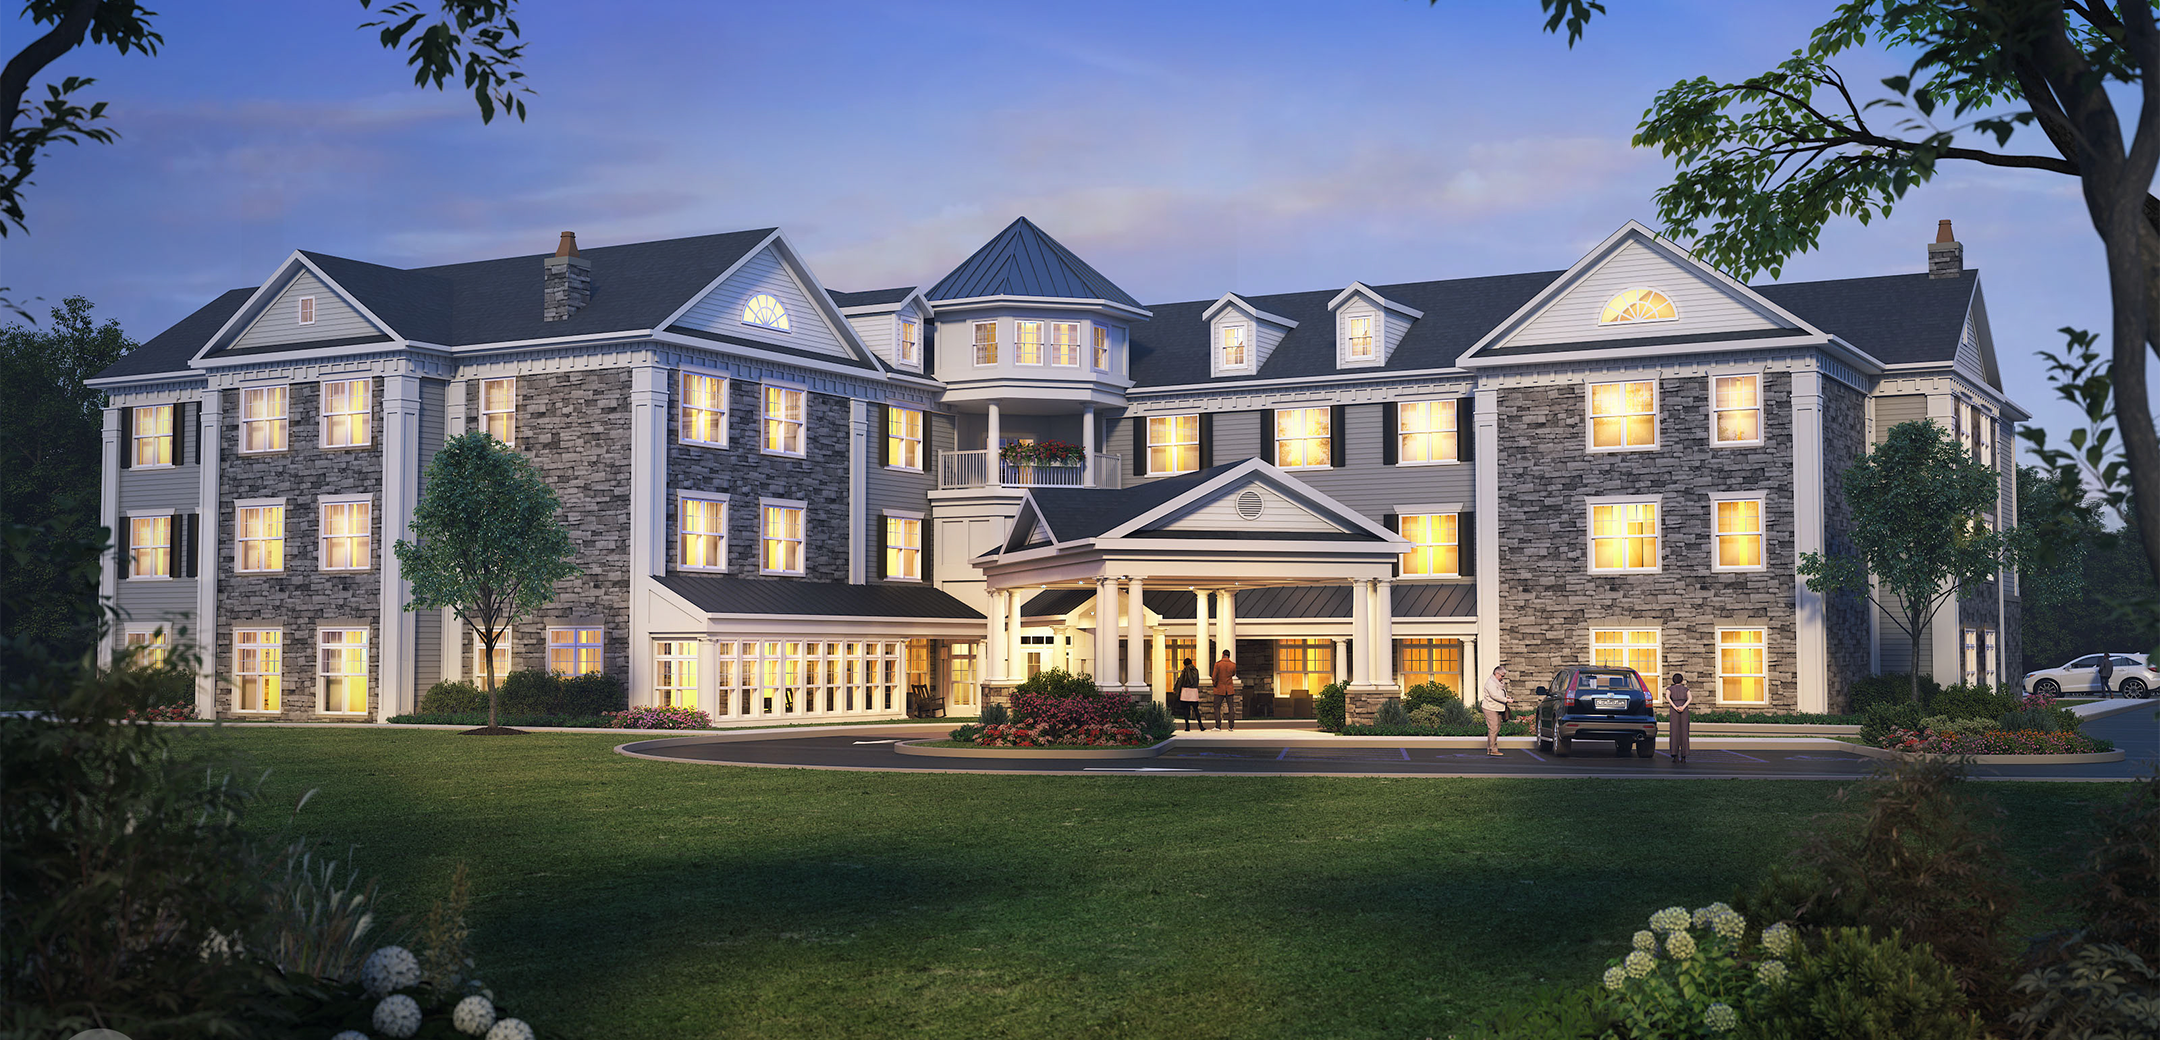 An exterior nighttime render of the Arbor Terrace Marlton stone brick, white wood accents and grey shingle roofing with a driveway, parking lot and grass lawn in the foreground.